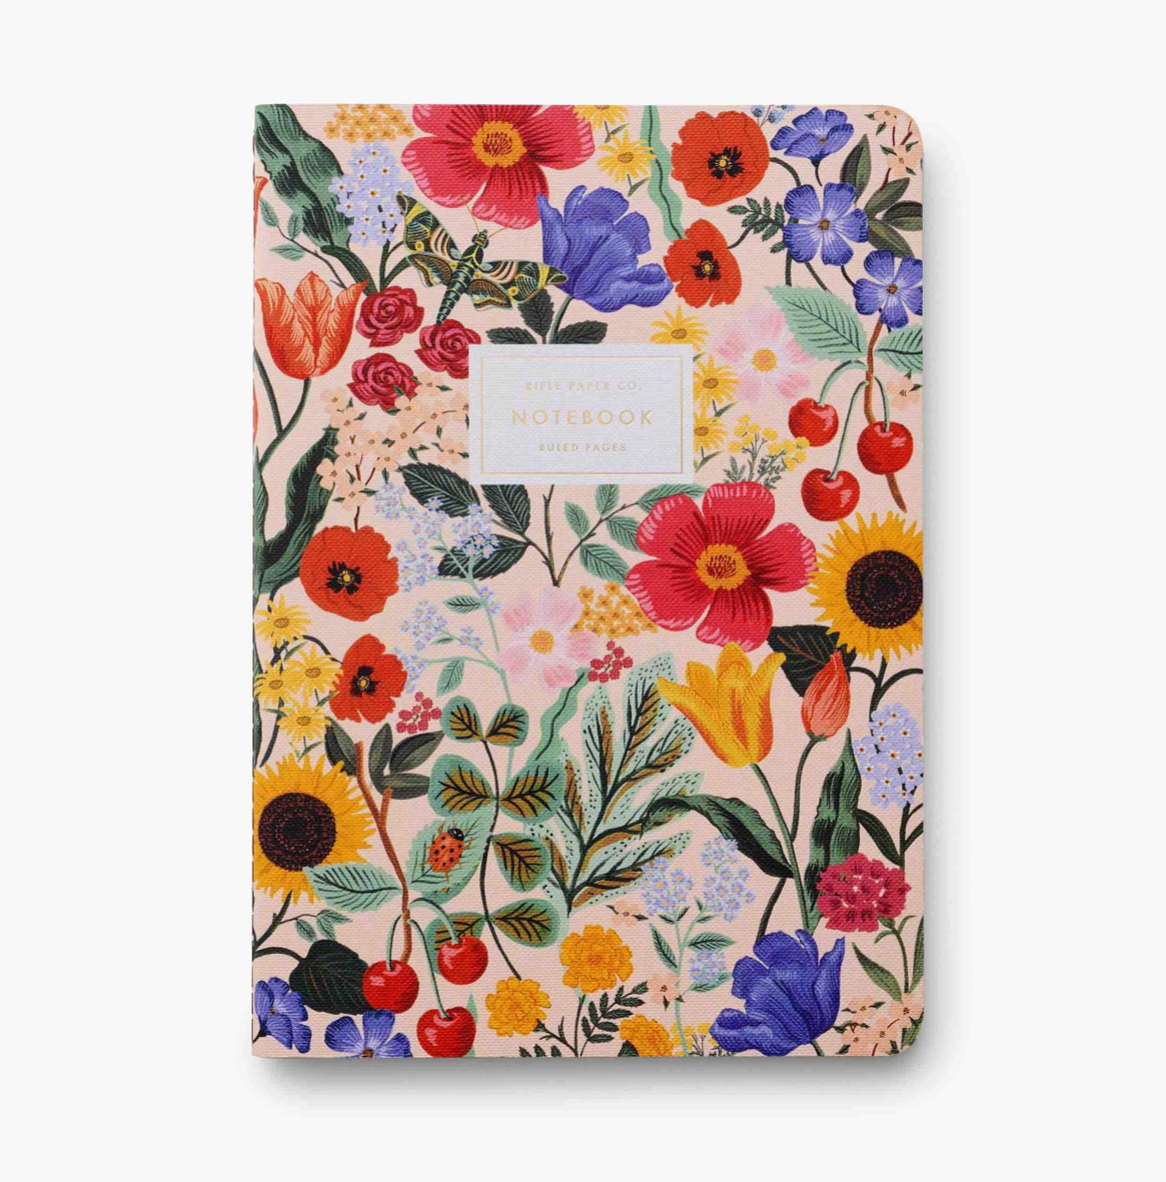 Blossom Stitched Notebook Set by Rifle Paper Co.